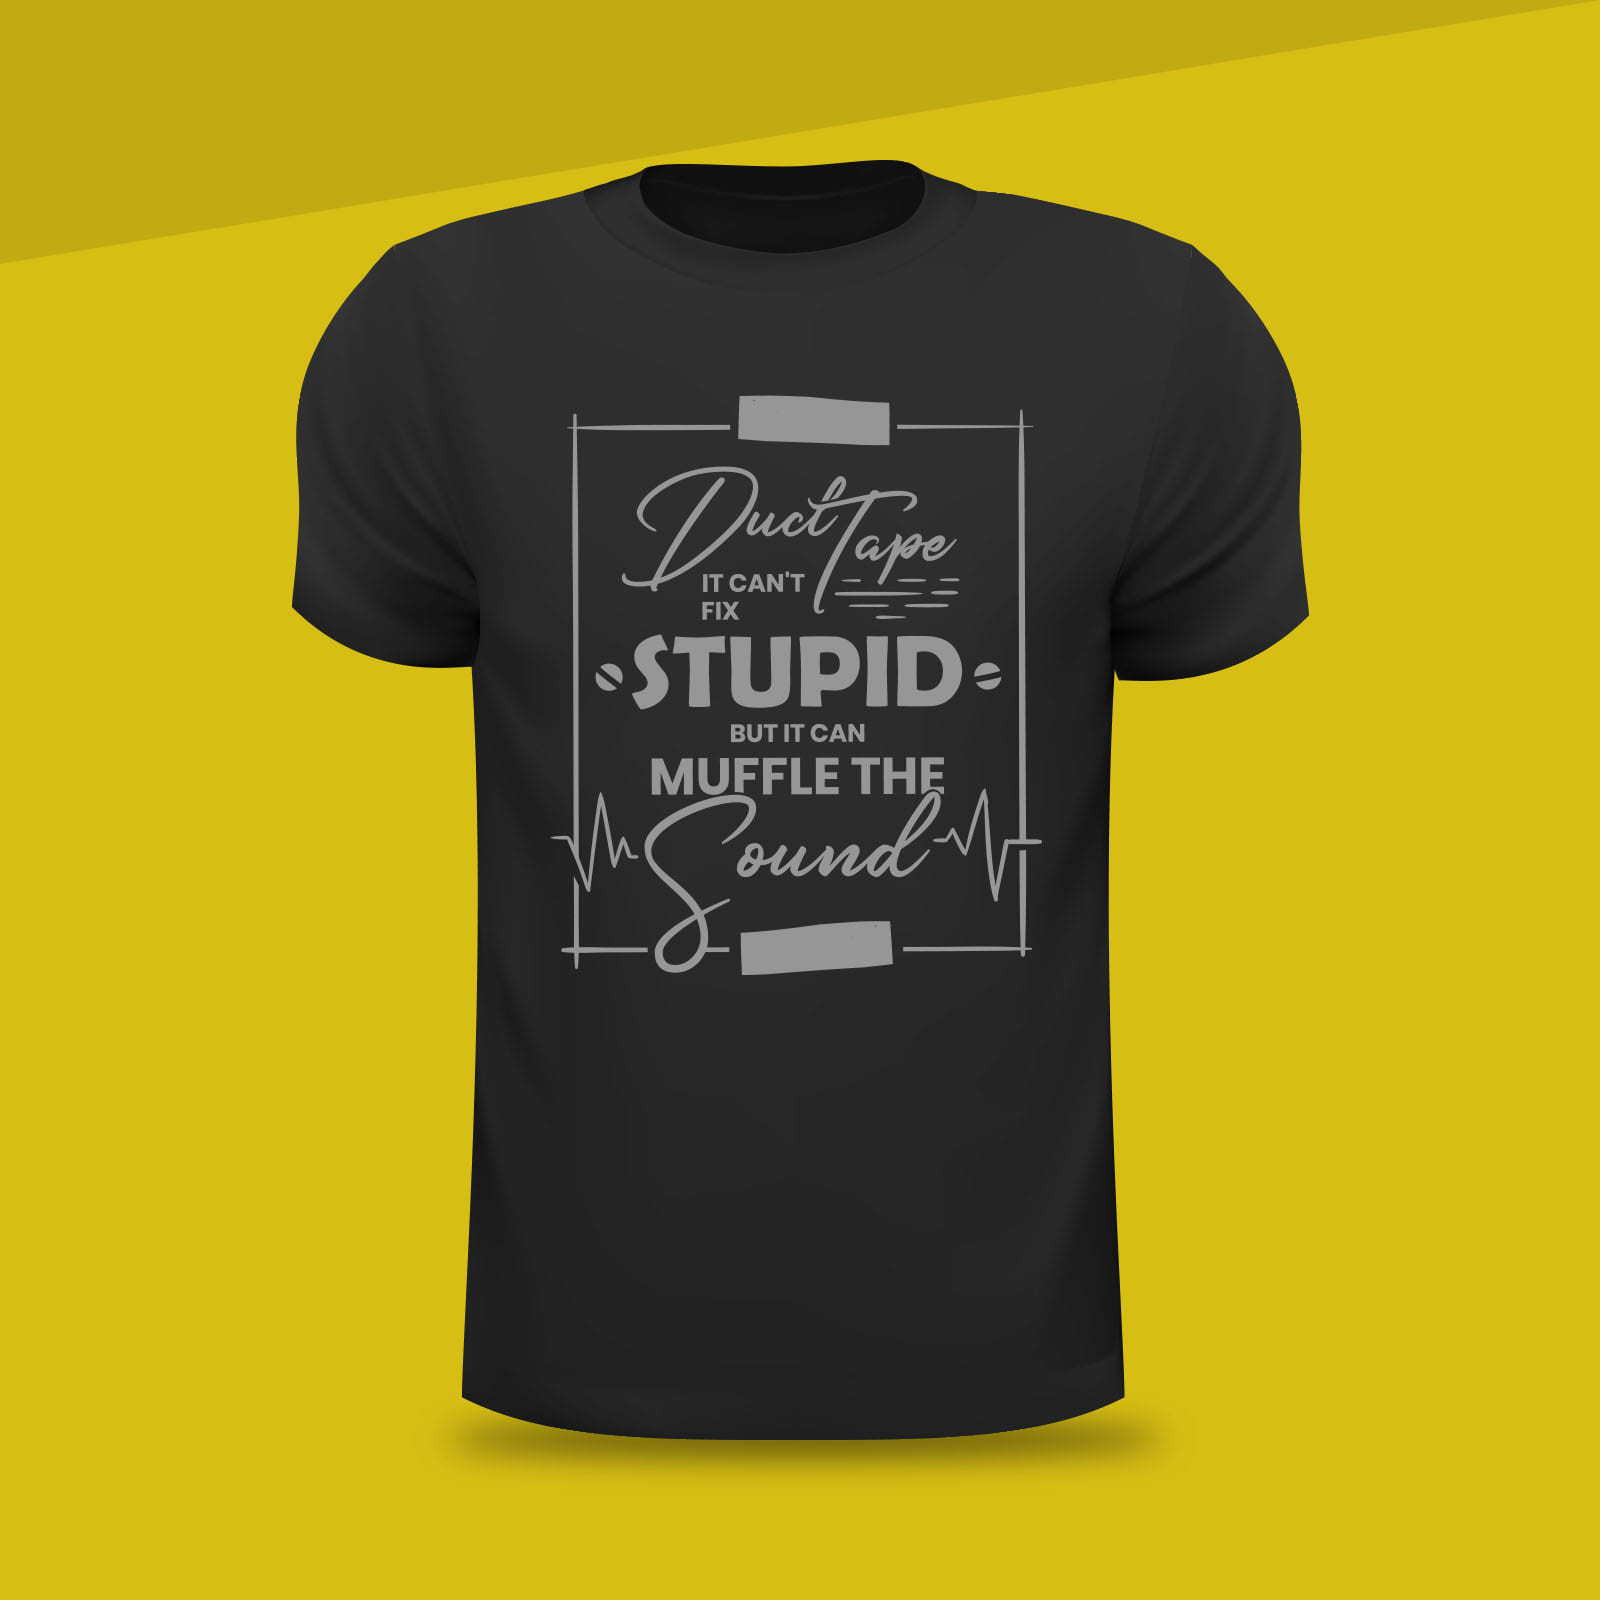 Graphic-t-shirt-design-by-Flocksy-depicting-font-selection